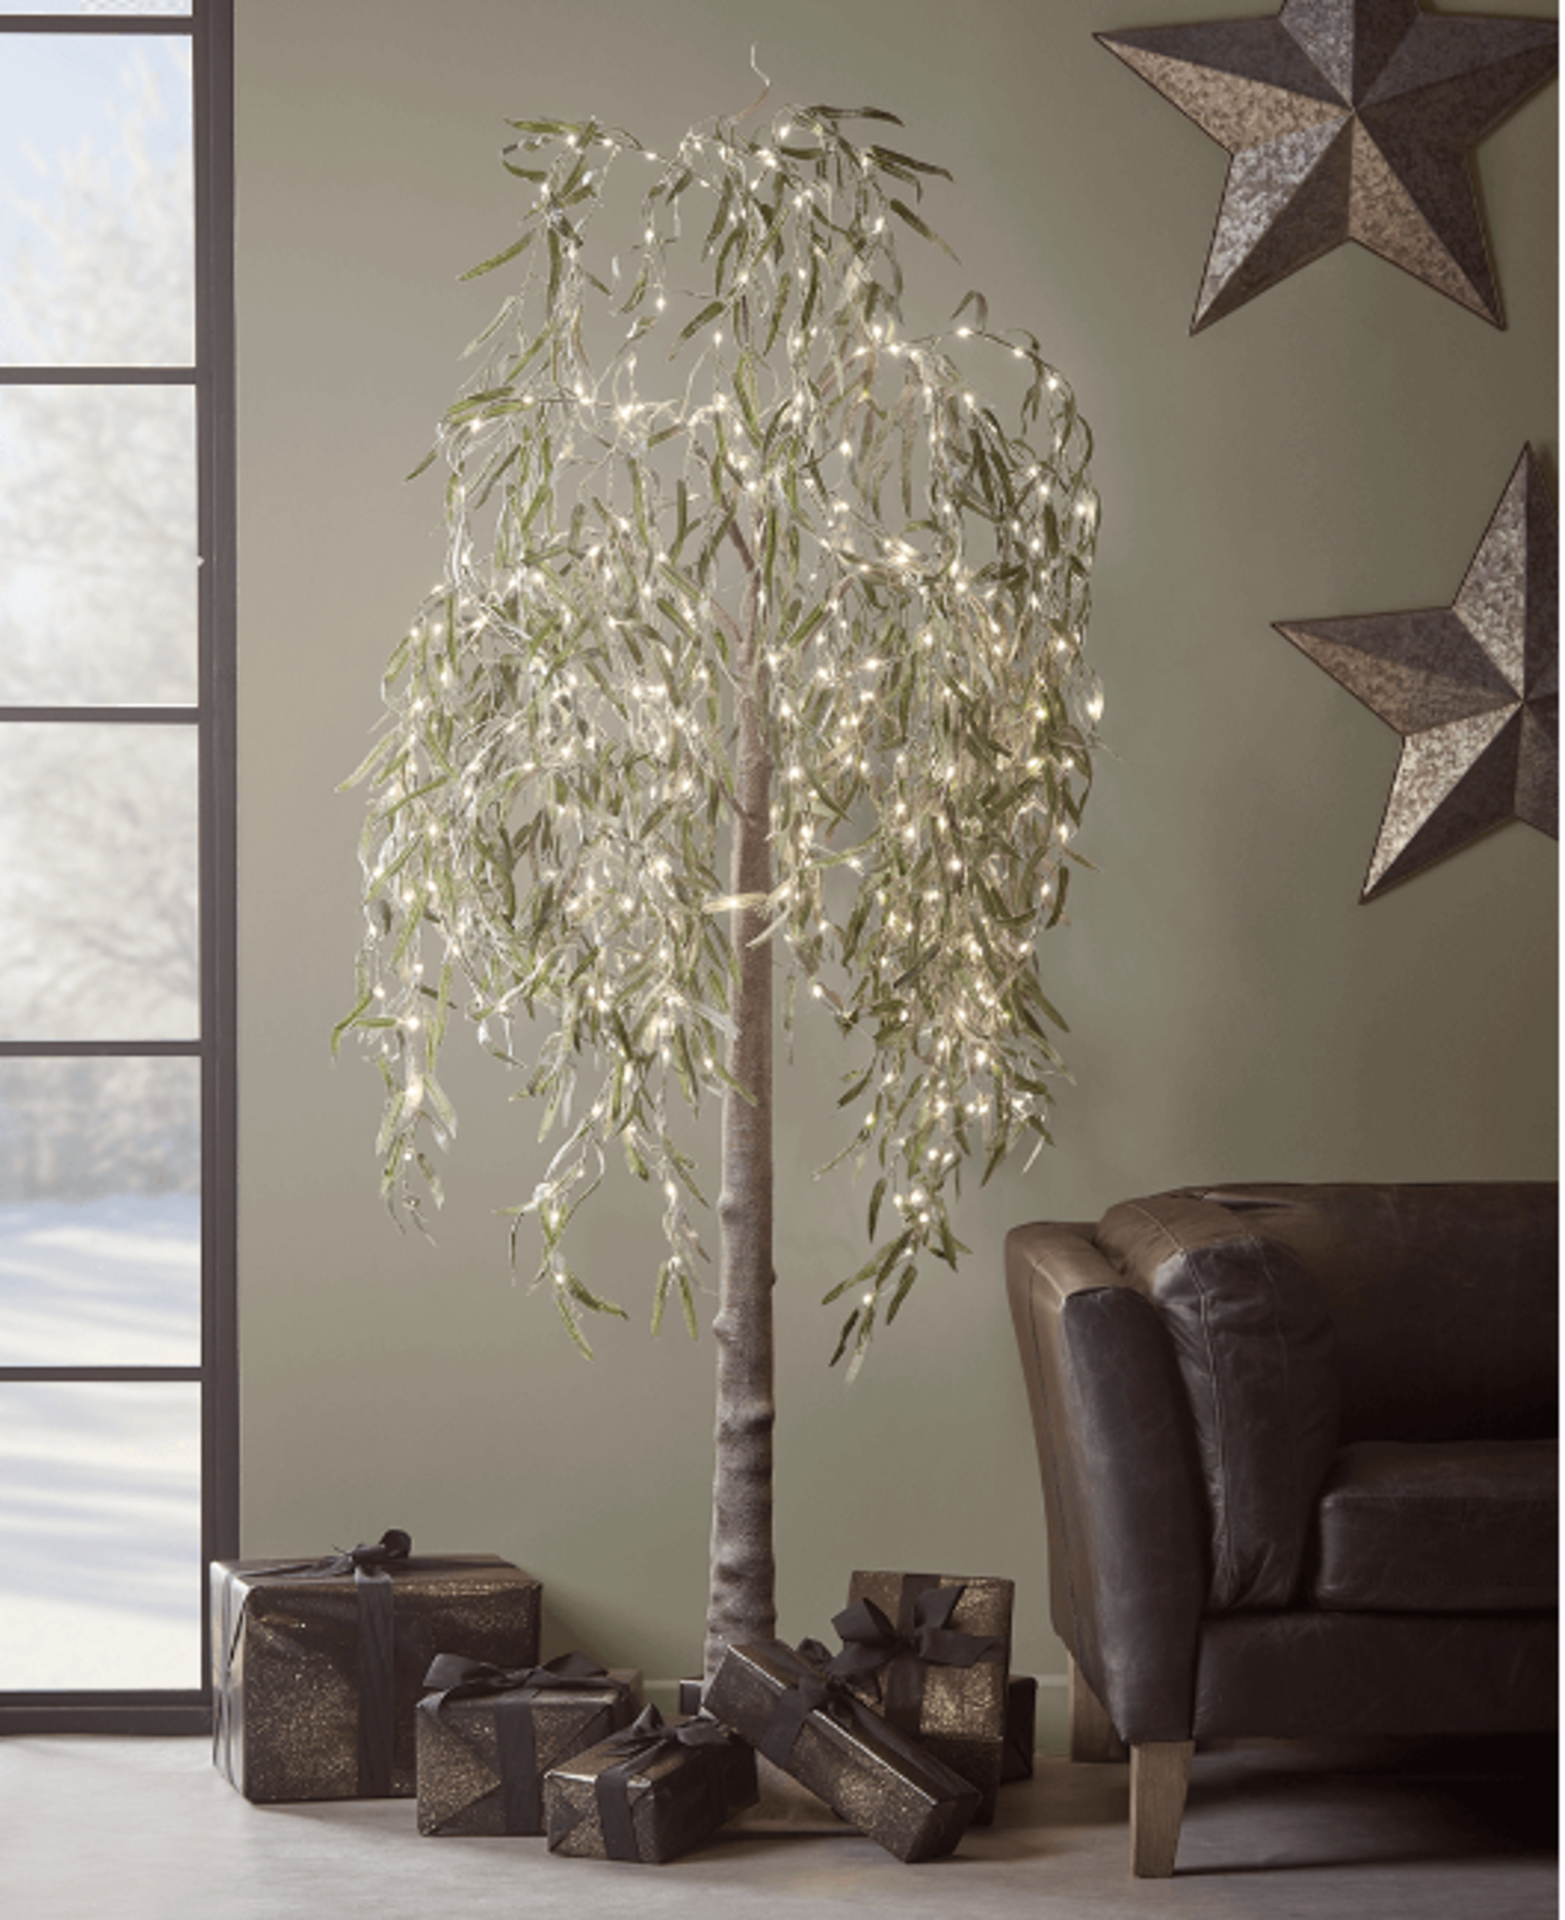 Indoor Outdoor Light Up Faux Willow Tree - Large. RRP £275.00. Extend the festive cheer to your